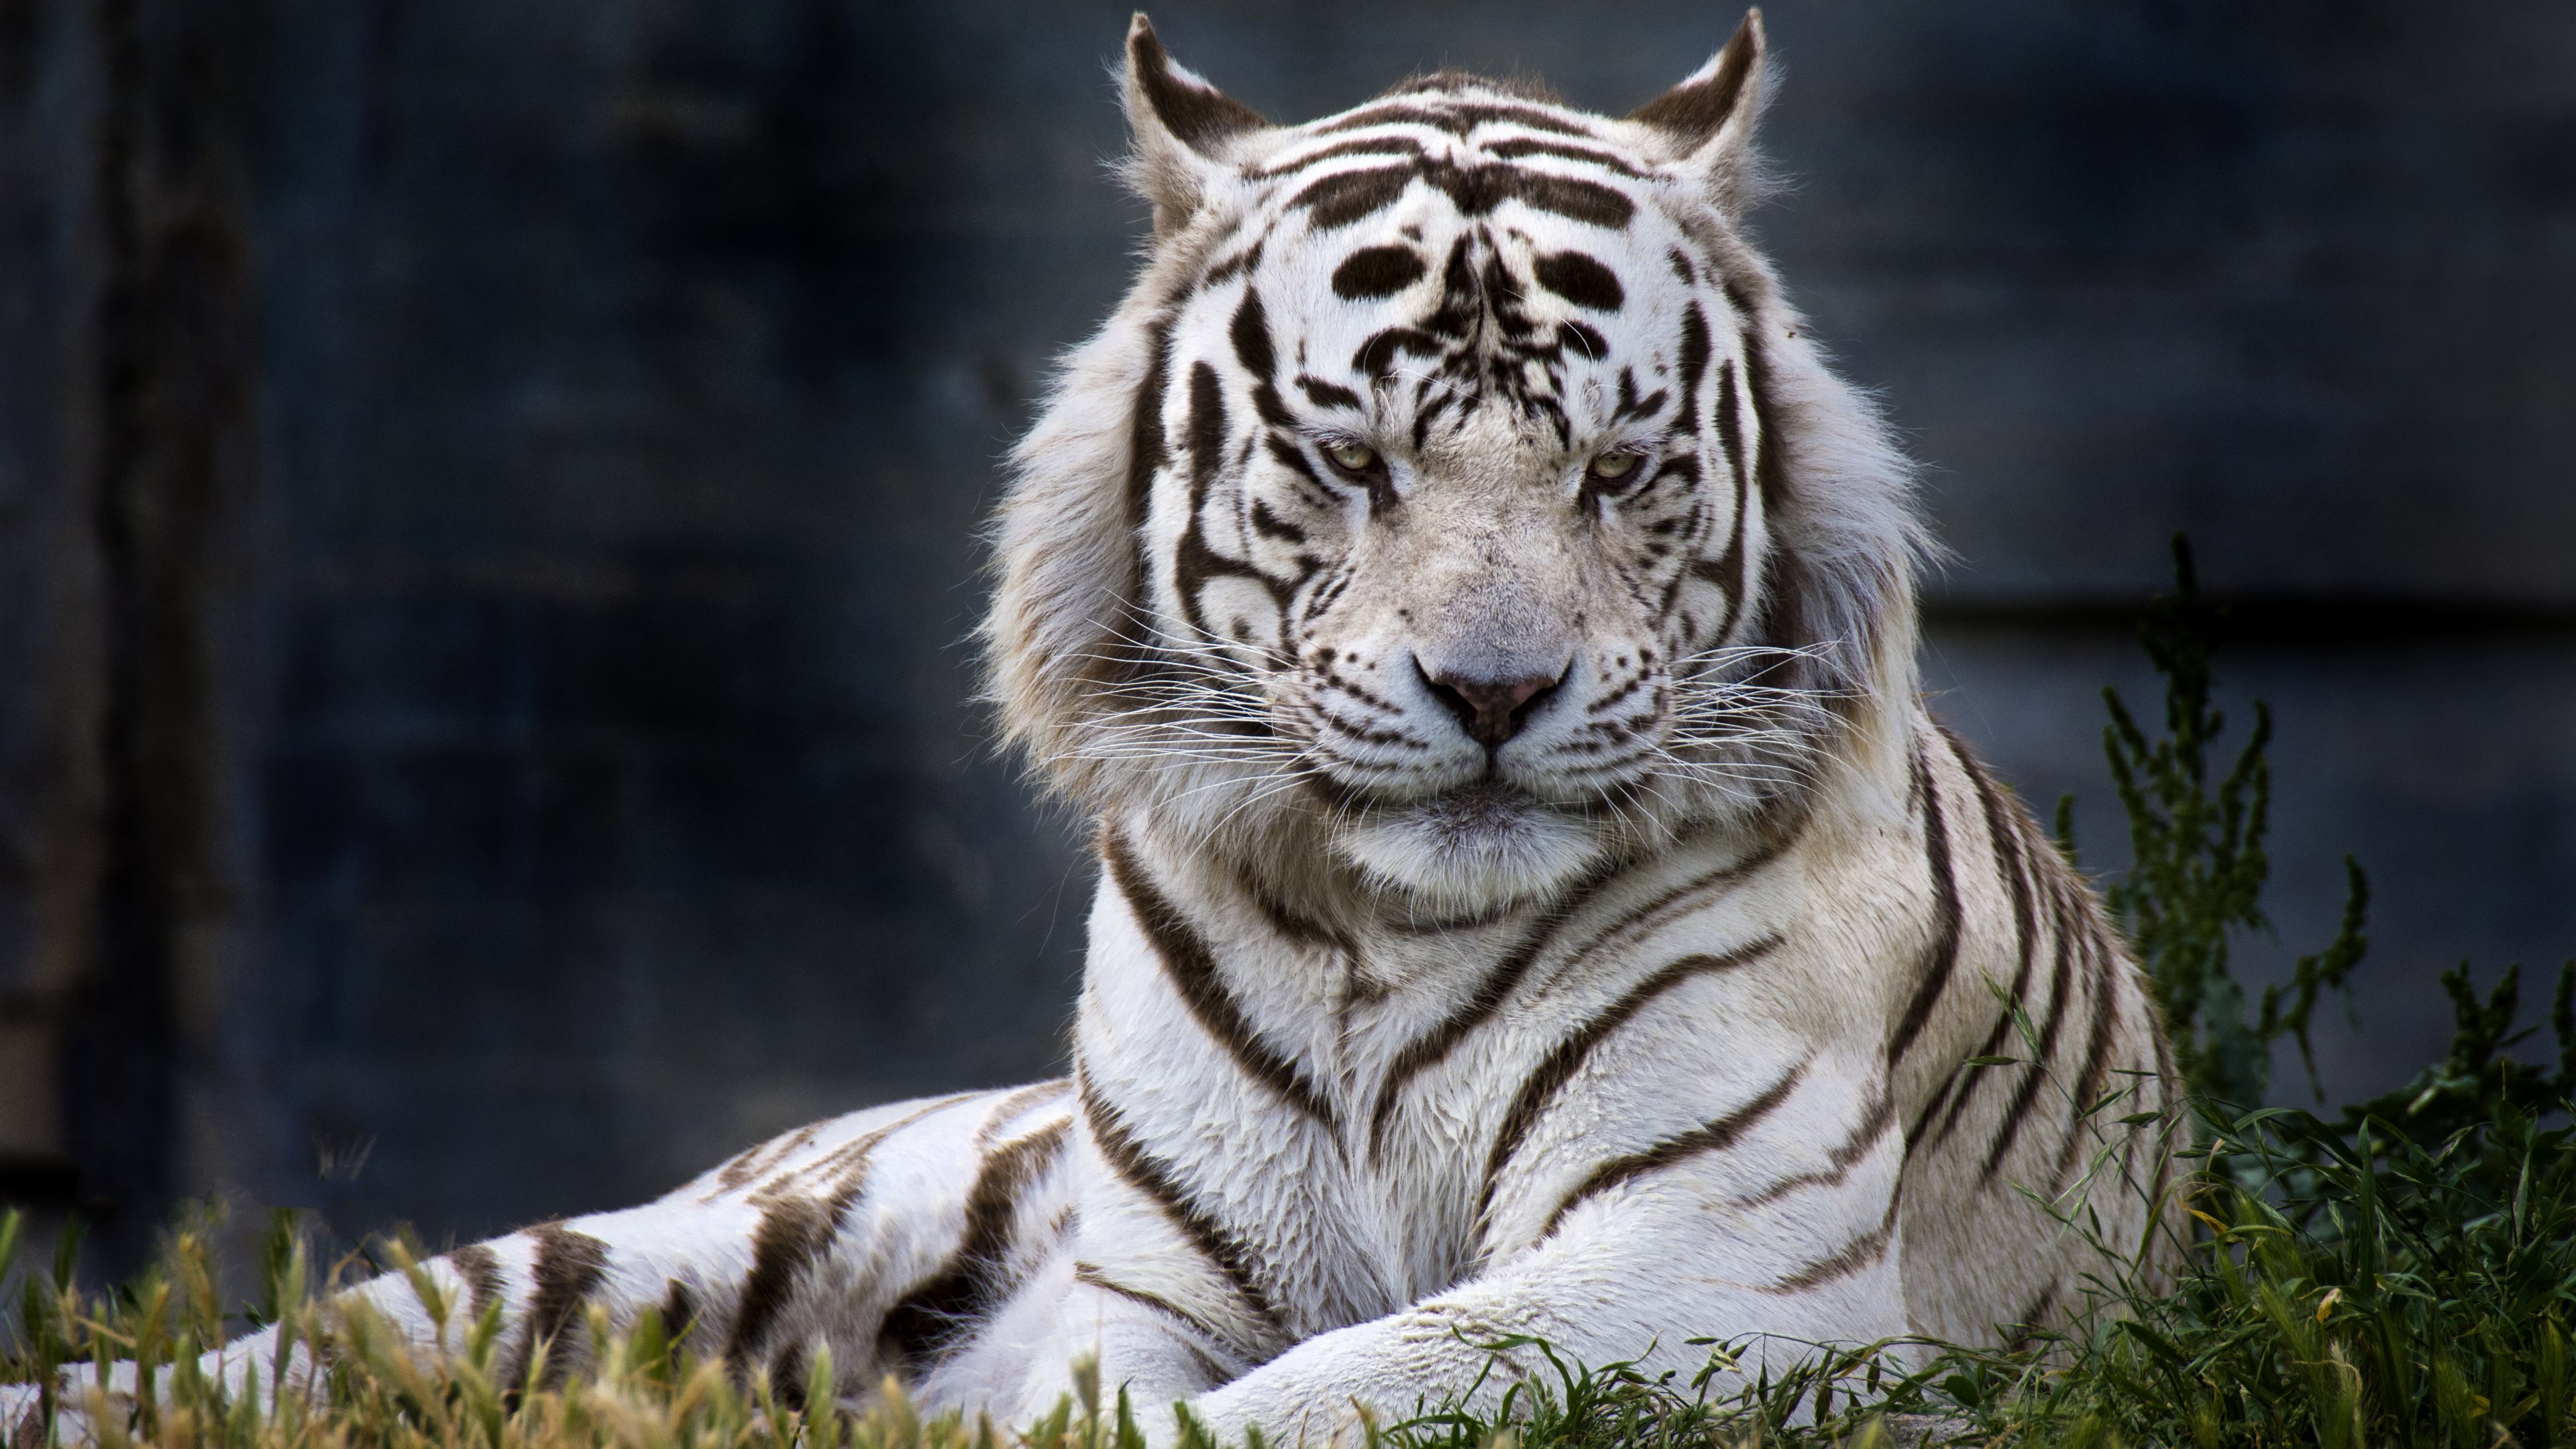 White Tiger Wallpapers Images Photos Pictures Backgrounds 3840x2160